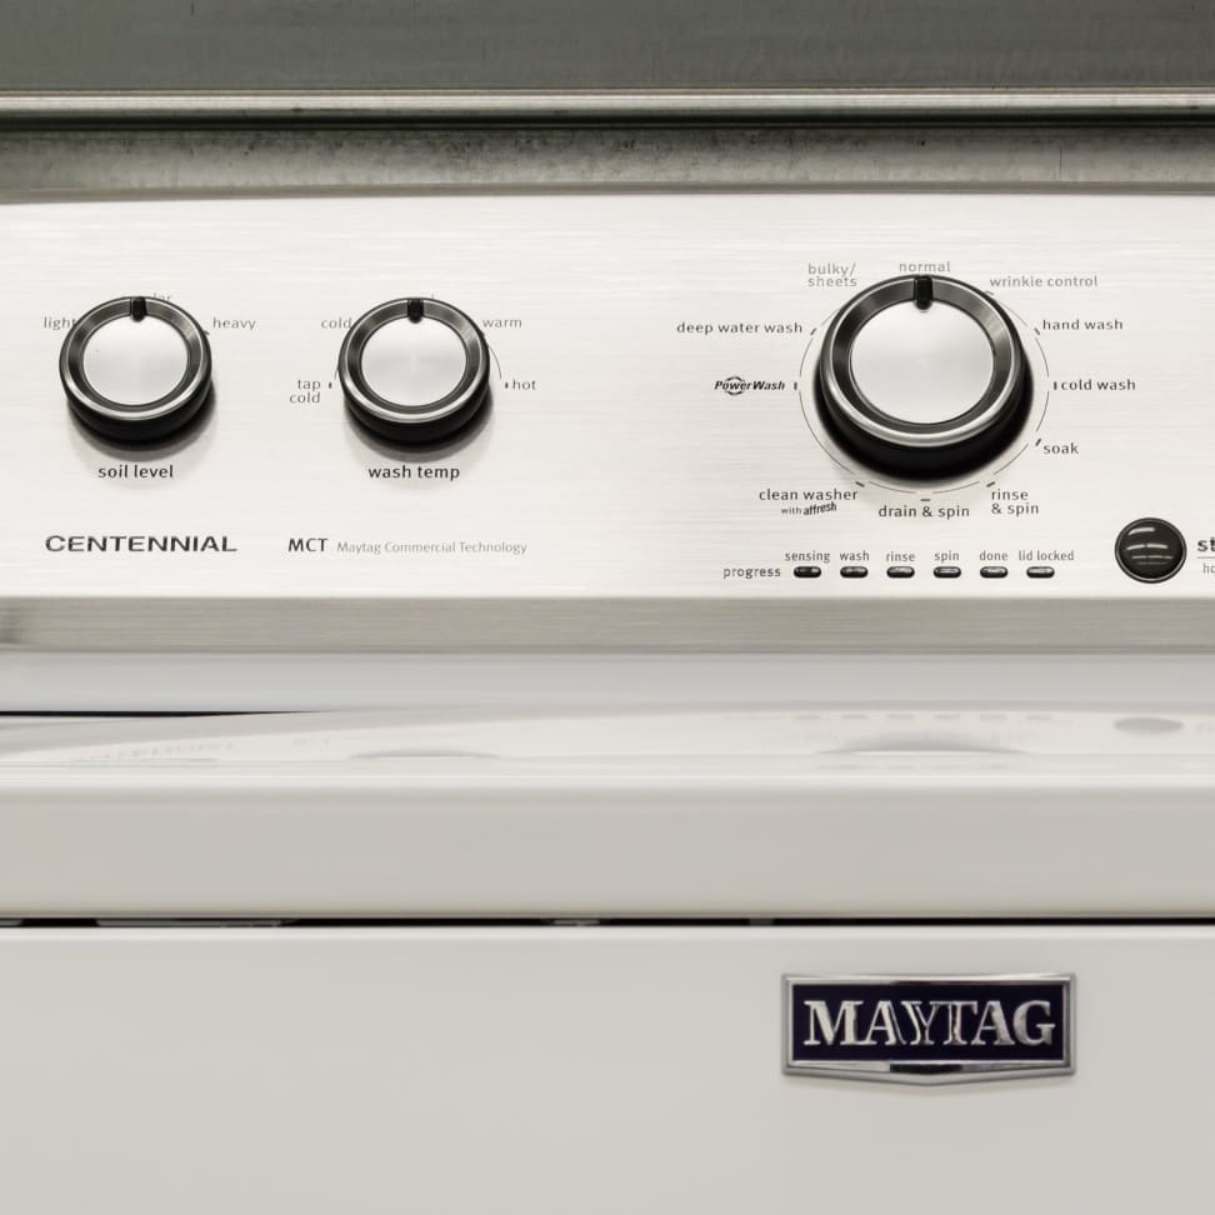 How To Fix The Error Code F80 For Maytag Washing Machine